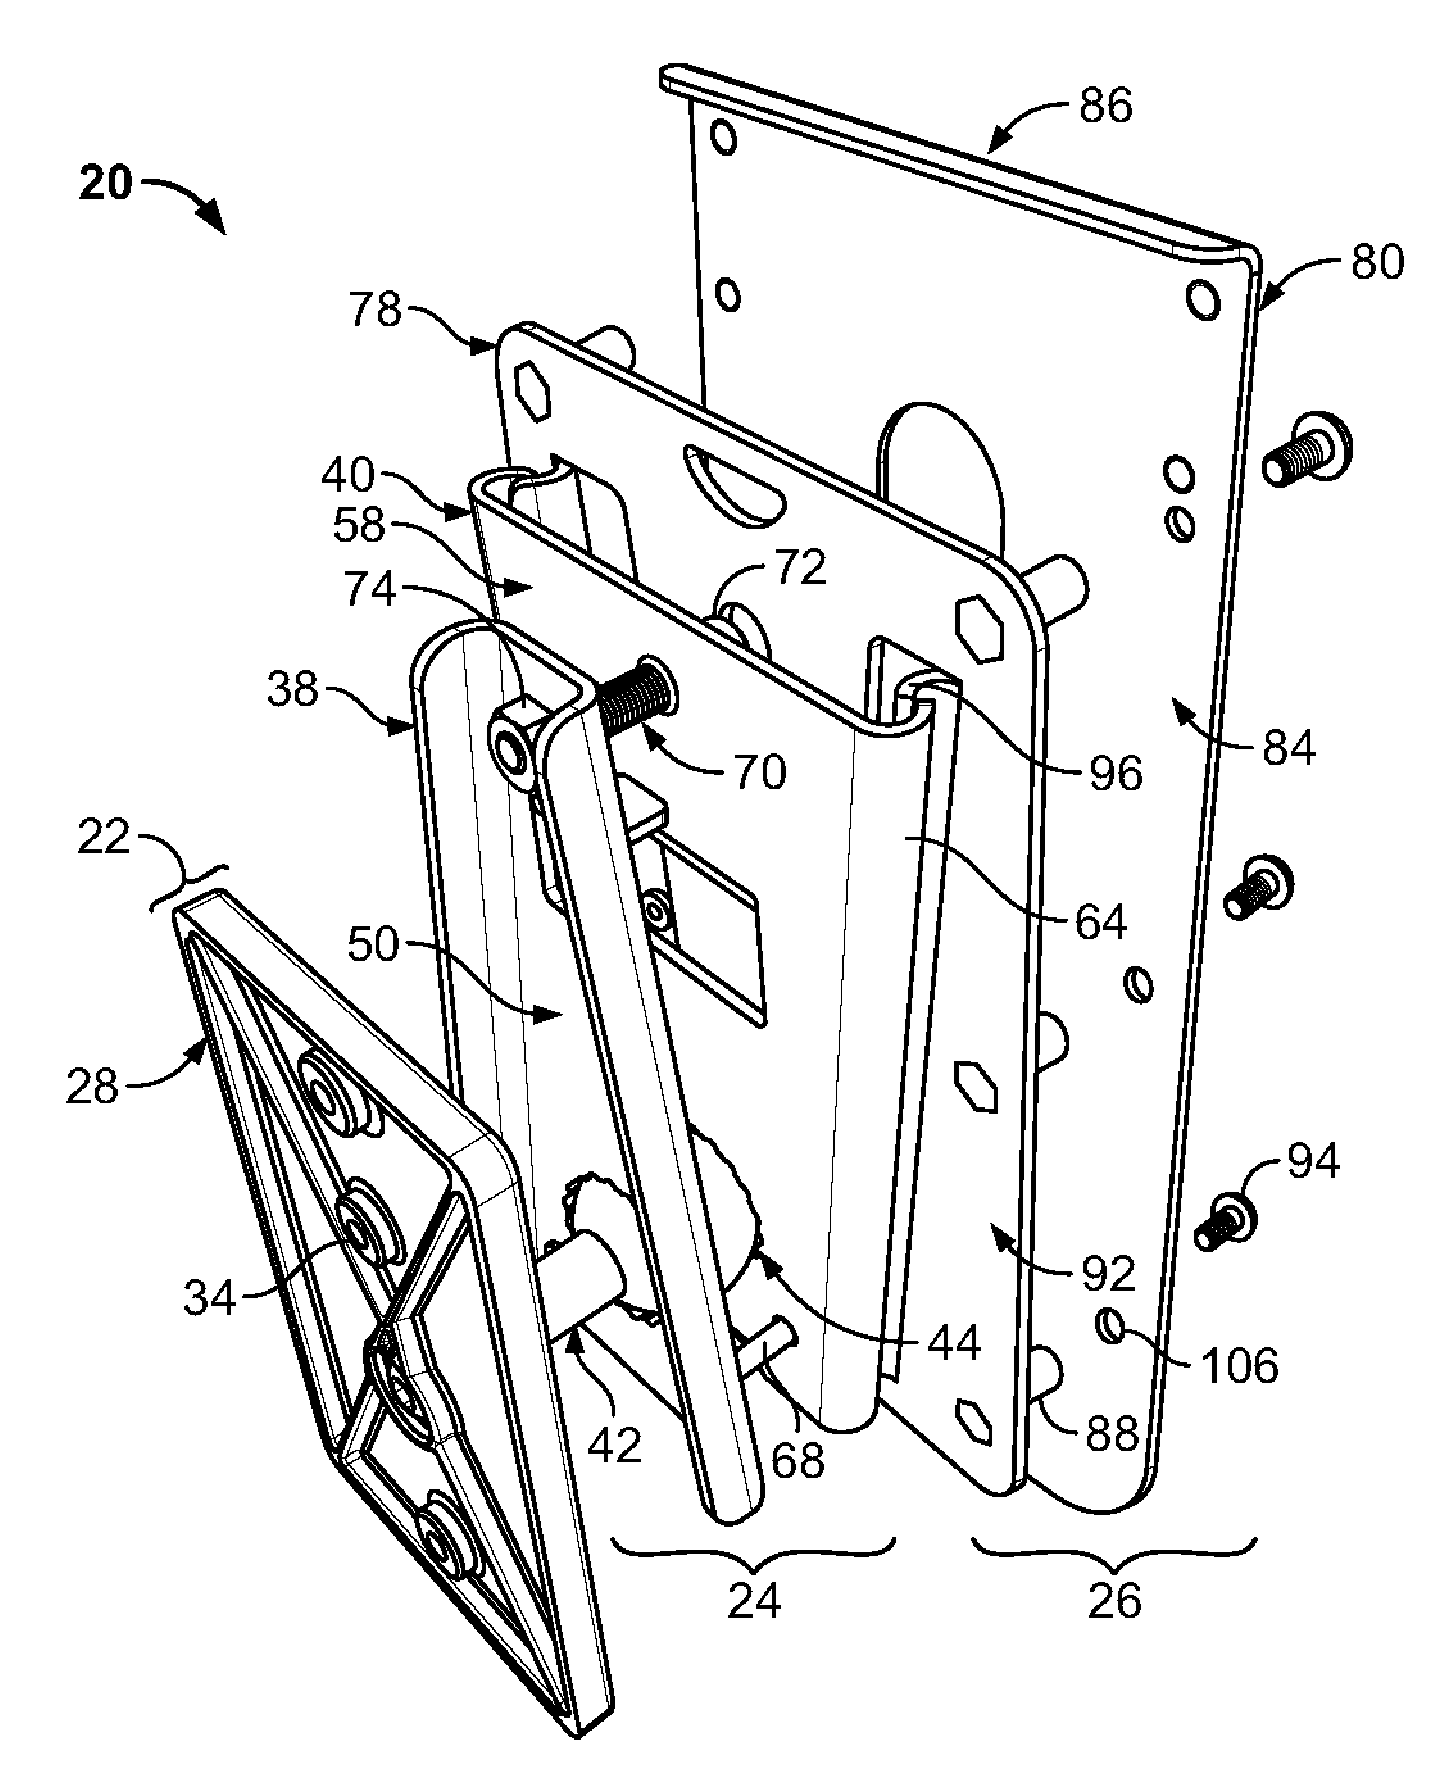 Method and apparatus for adjustably mounting a speaker